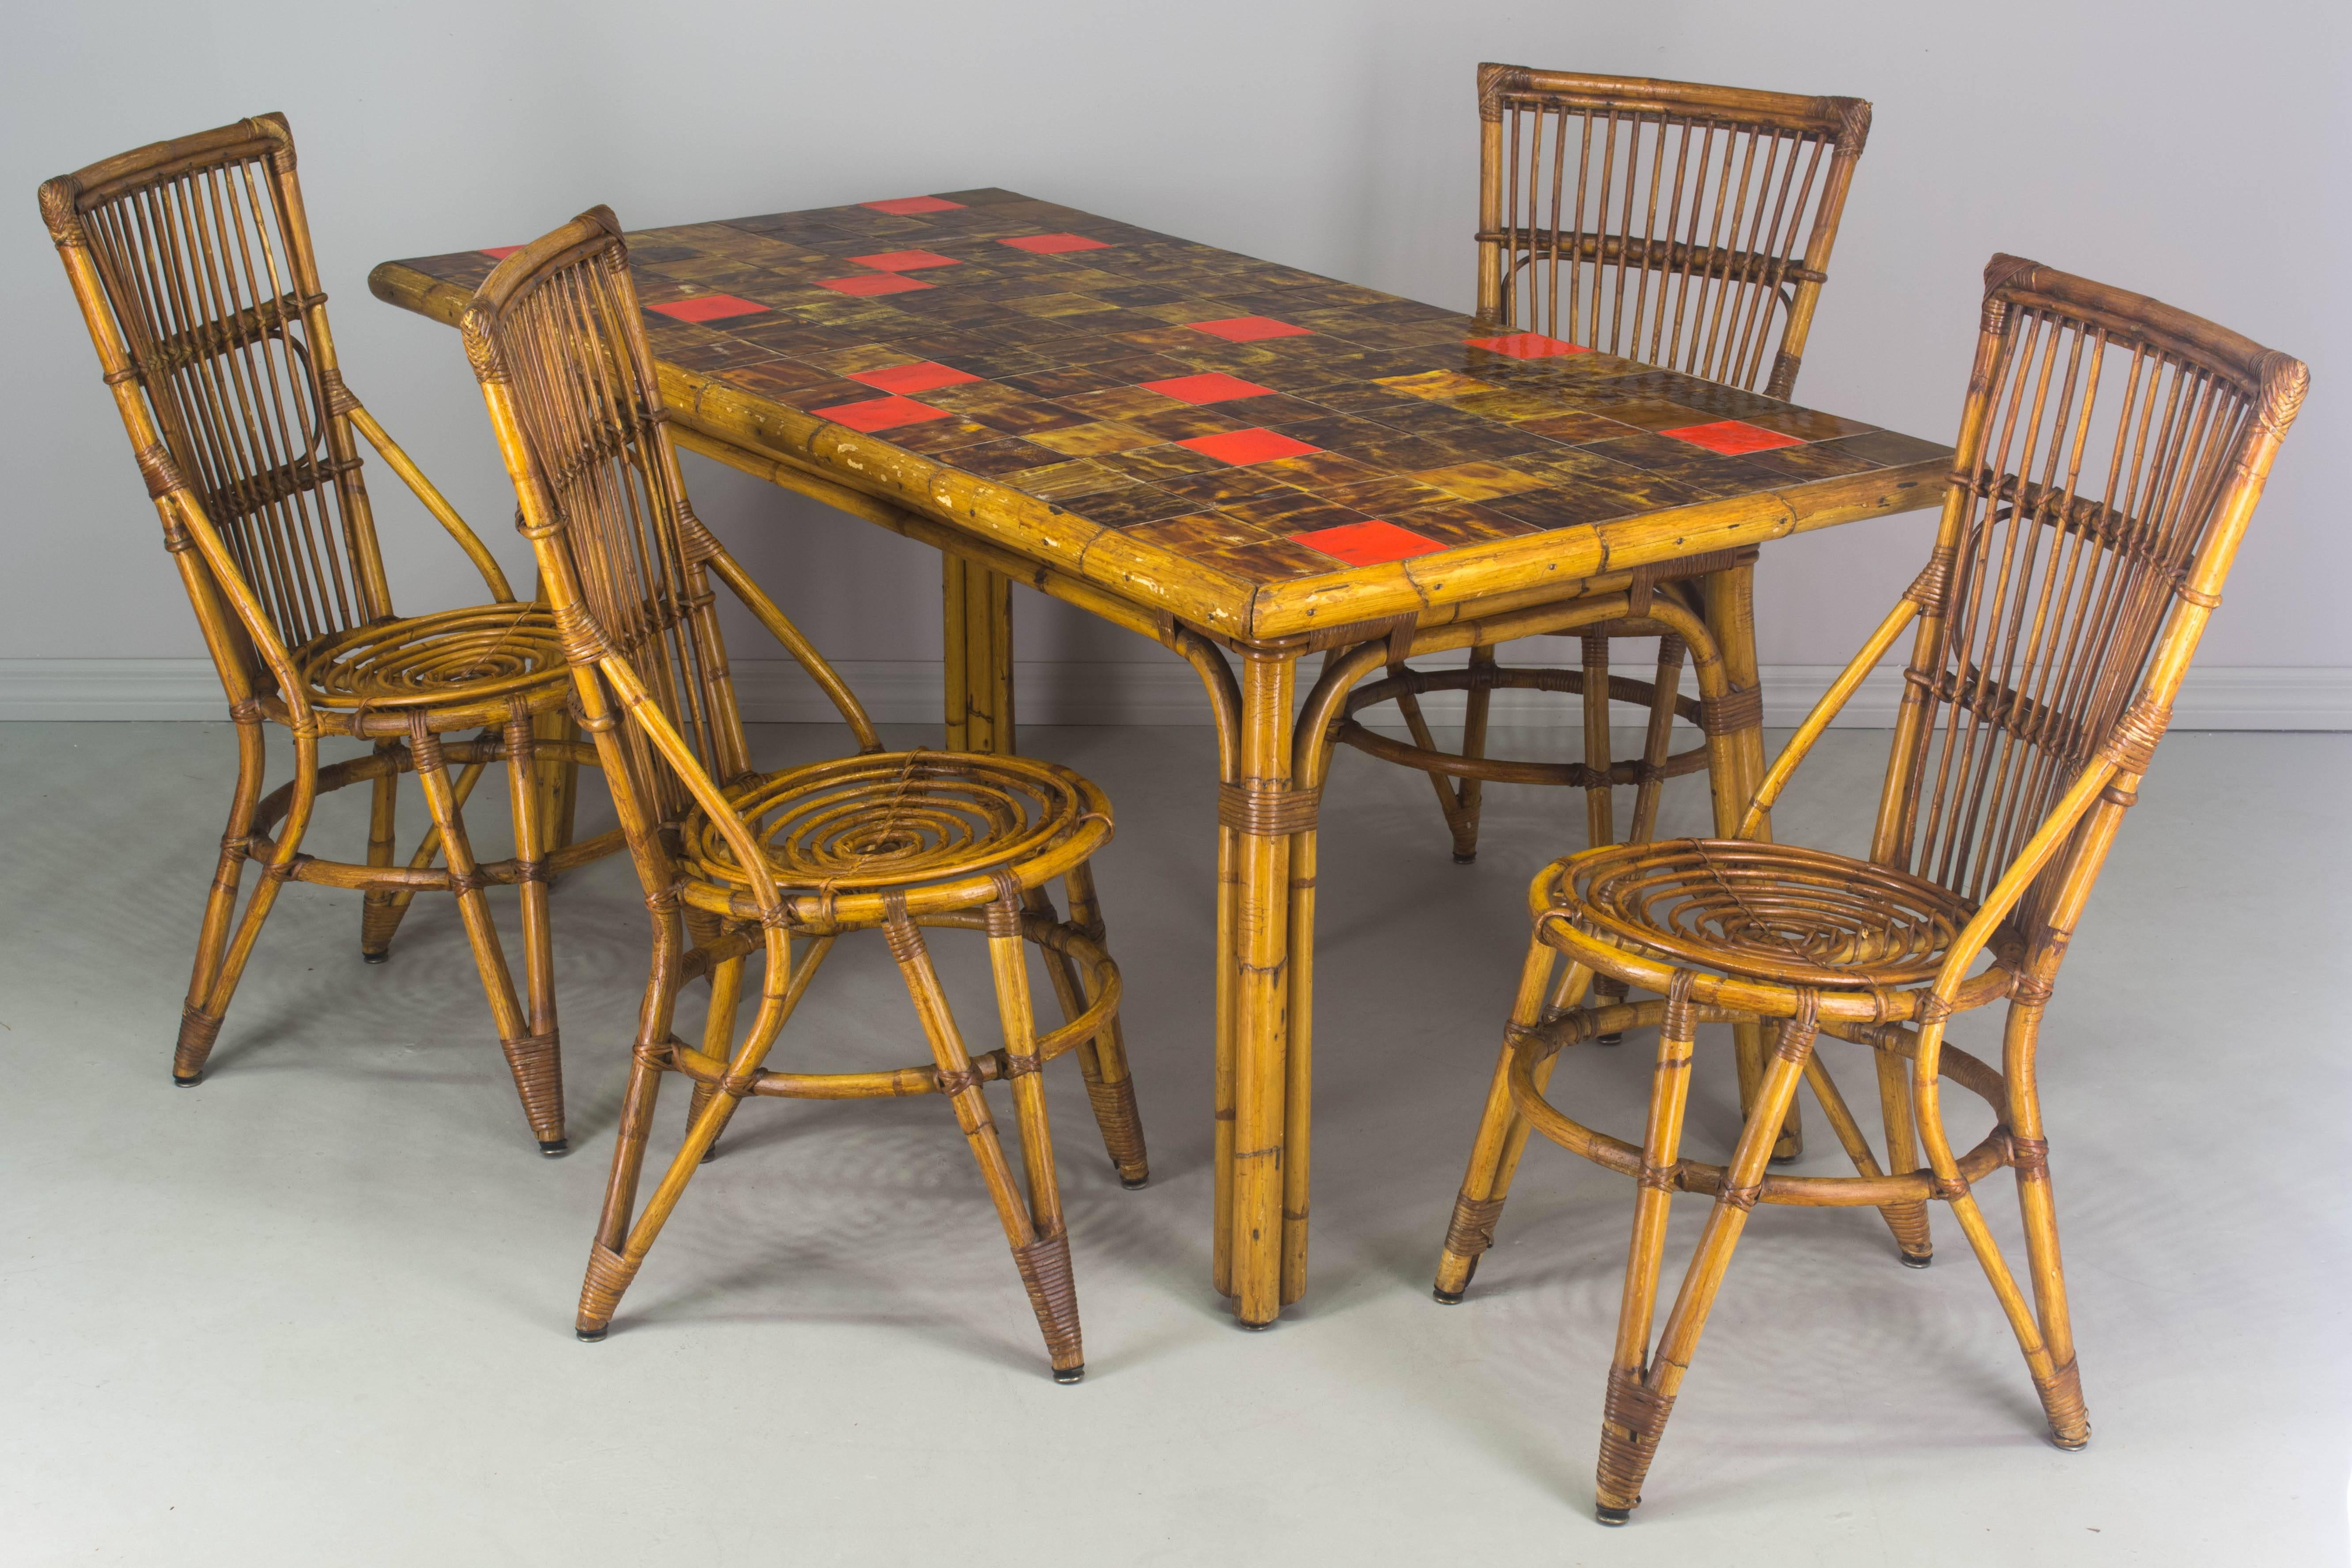 French Mid-Century Riviera style rattan dining table and chair set. Table top has glazed ceramic tiles from the South of France. Four chairs are comfortable and sturdy. A chair pad (not included) may be added as shown. 
Table: 66